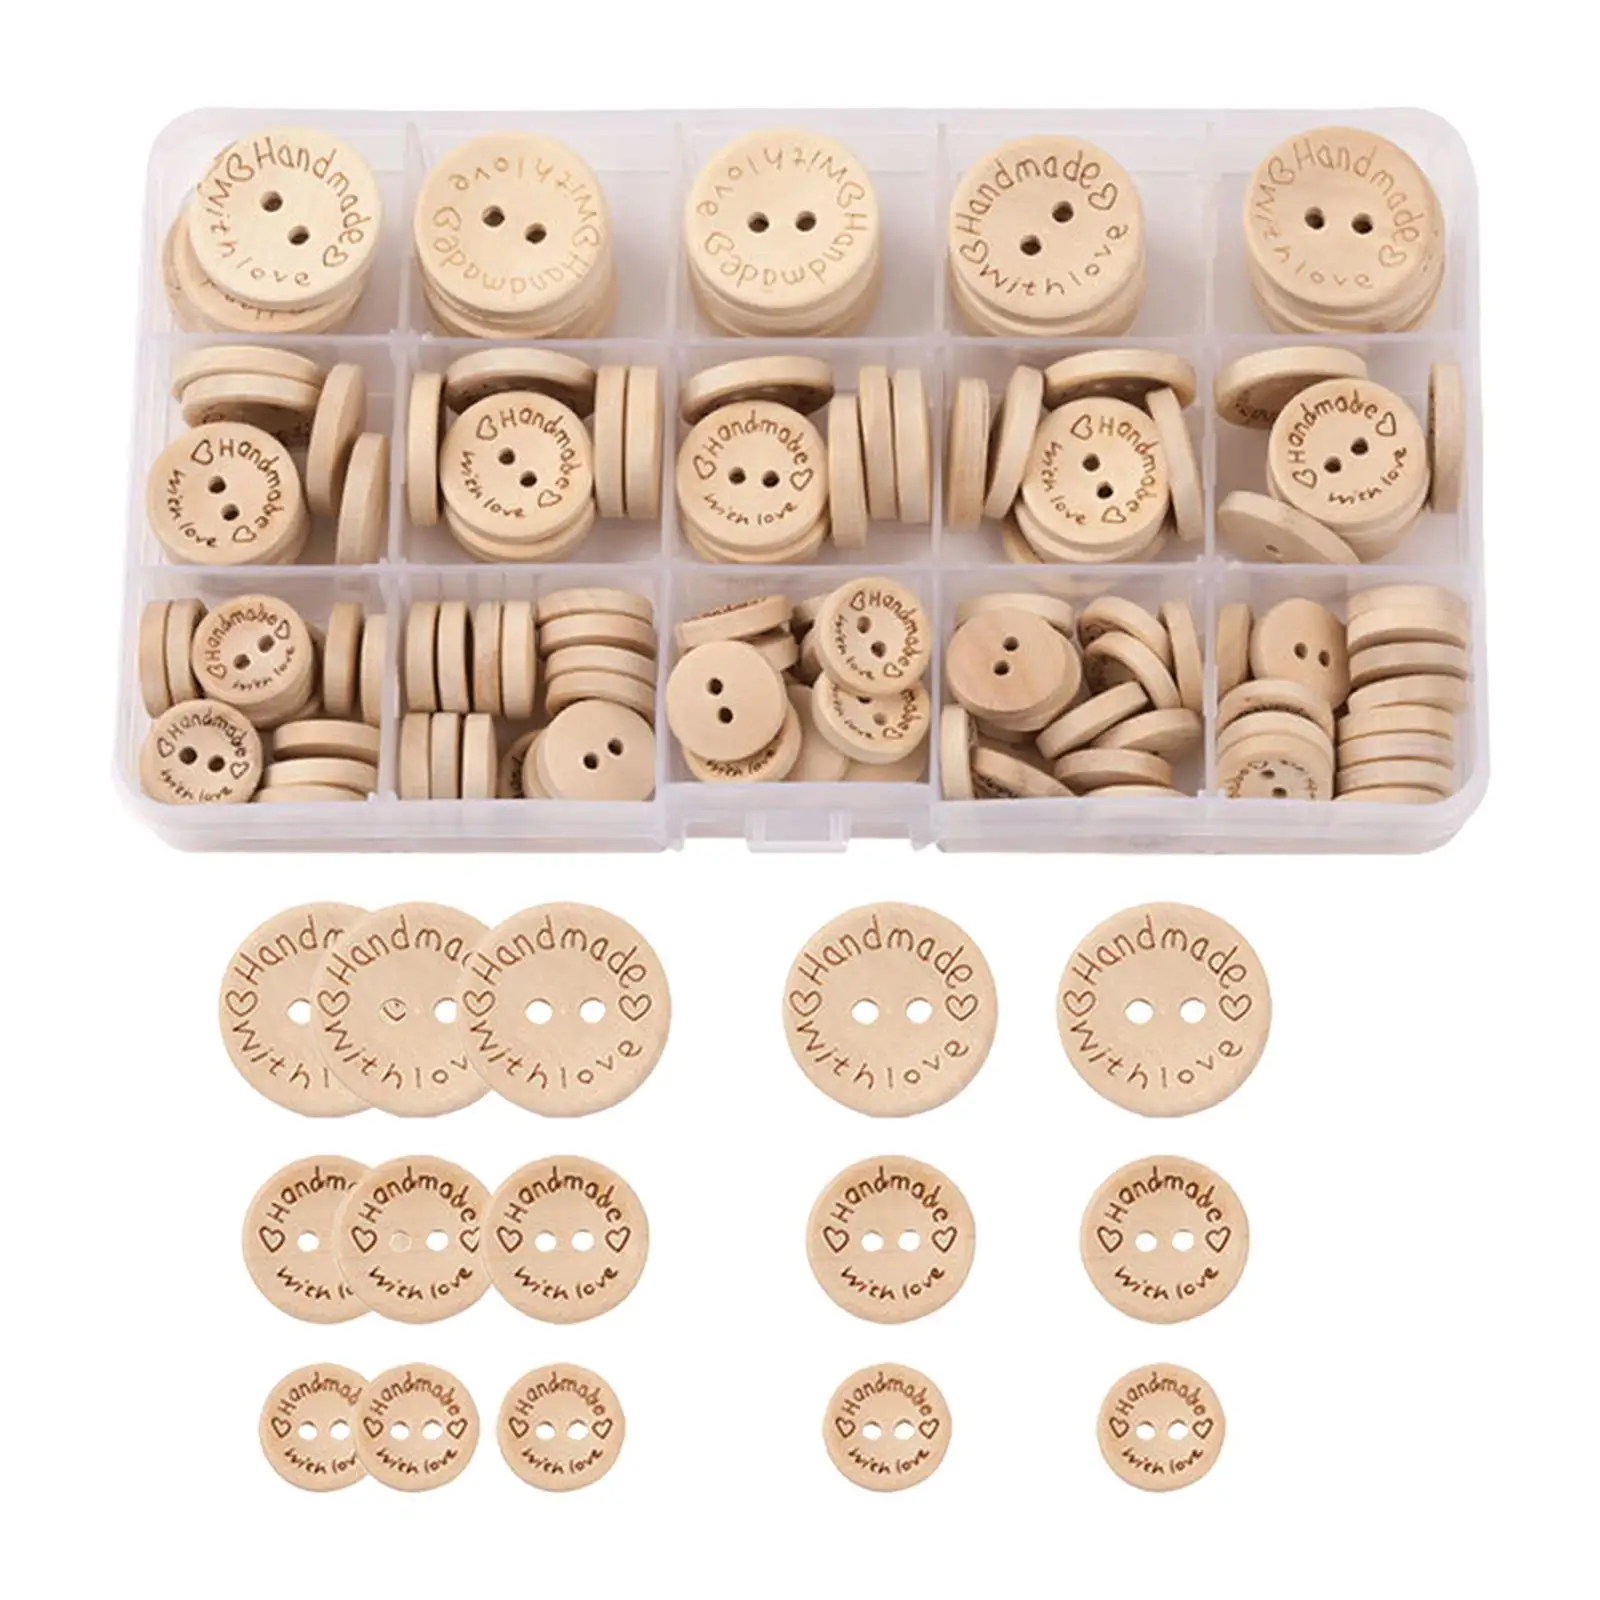 Wooden Handmade Buttons, with Round Shape Natural Color Sewing Buttons for Sewing Decorative Fabrics Card Making